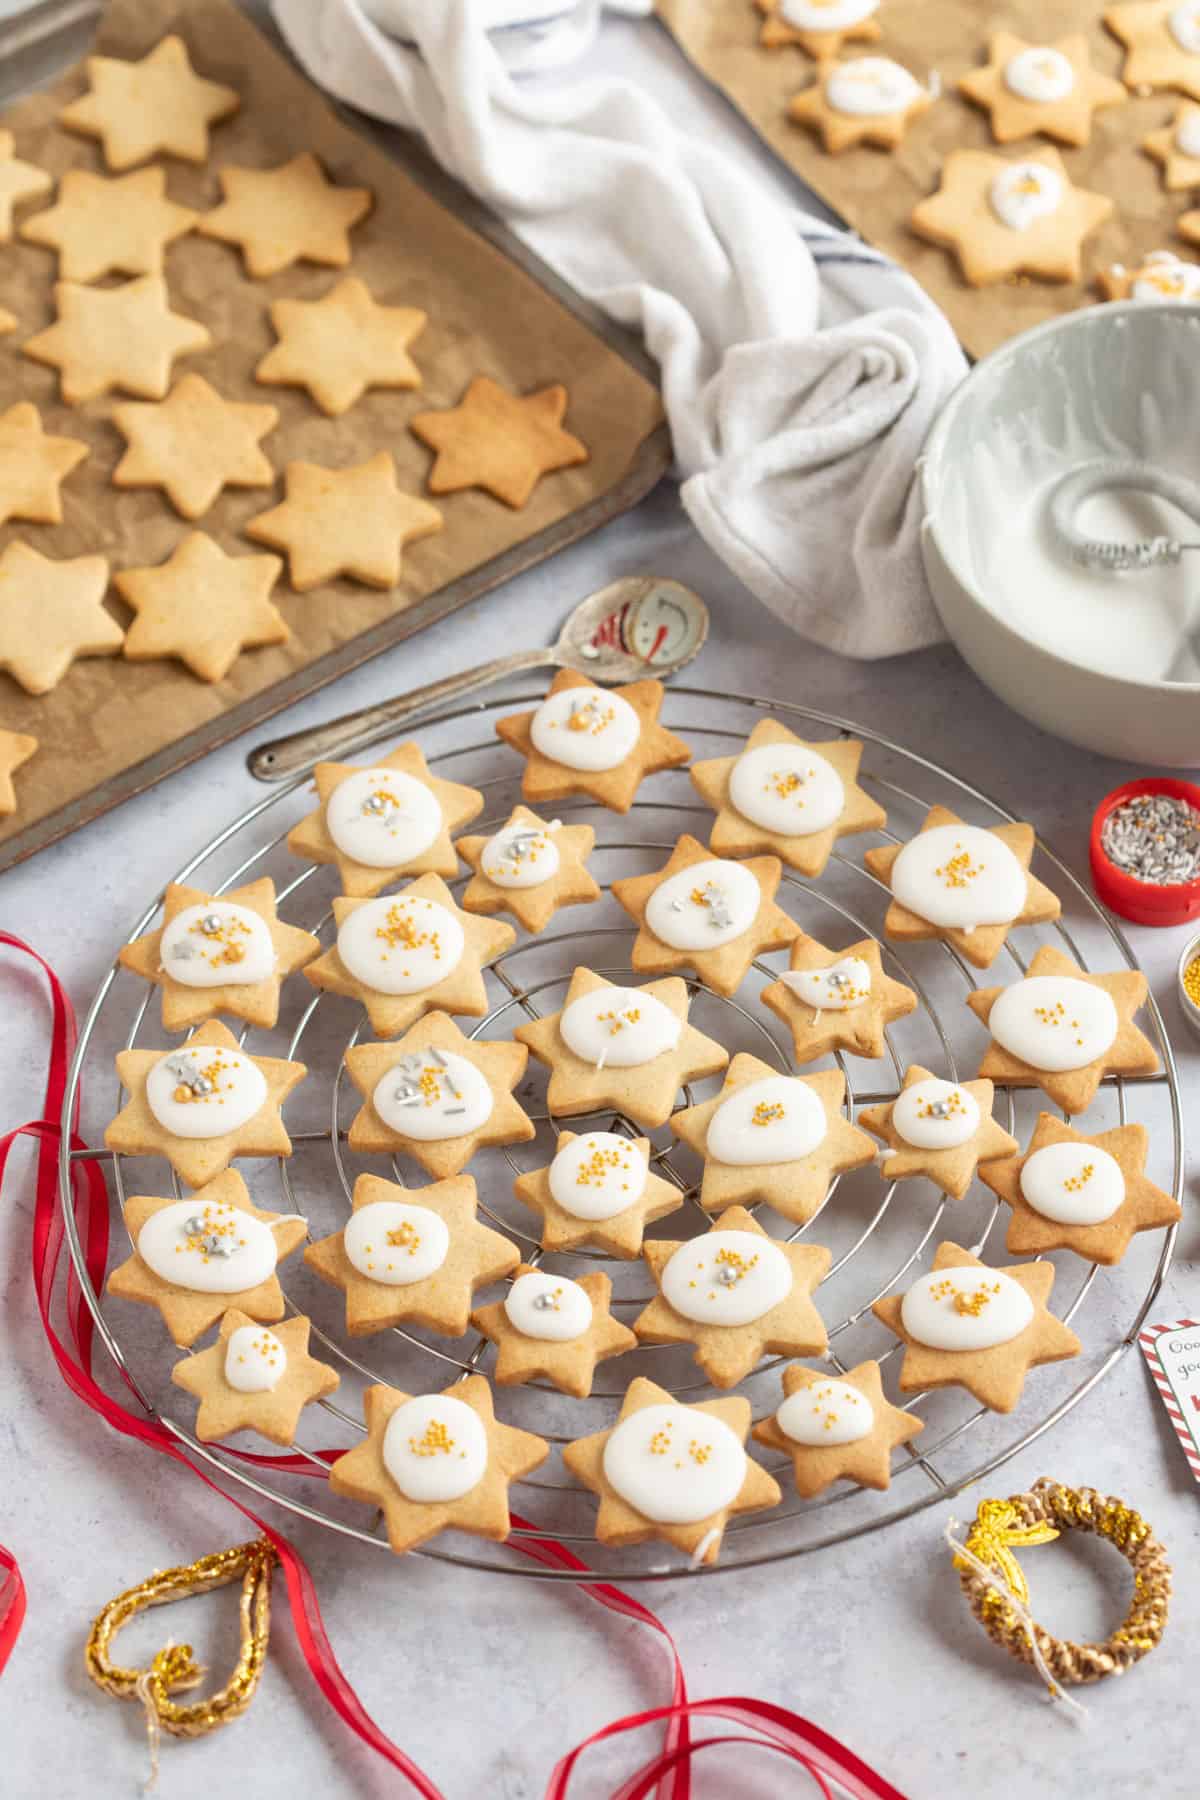 Christmas star biscuits on wire racks and baking trays.